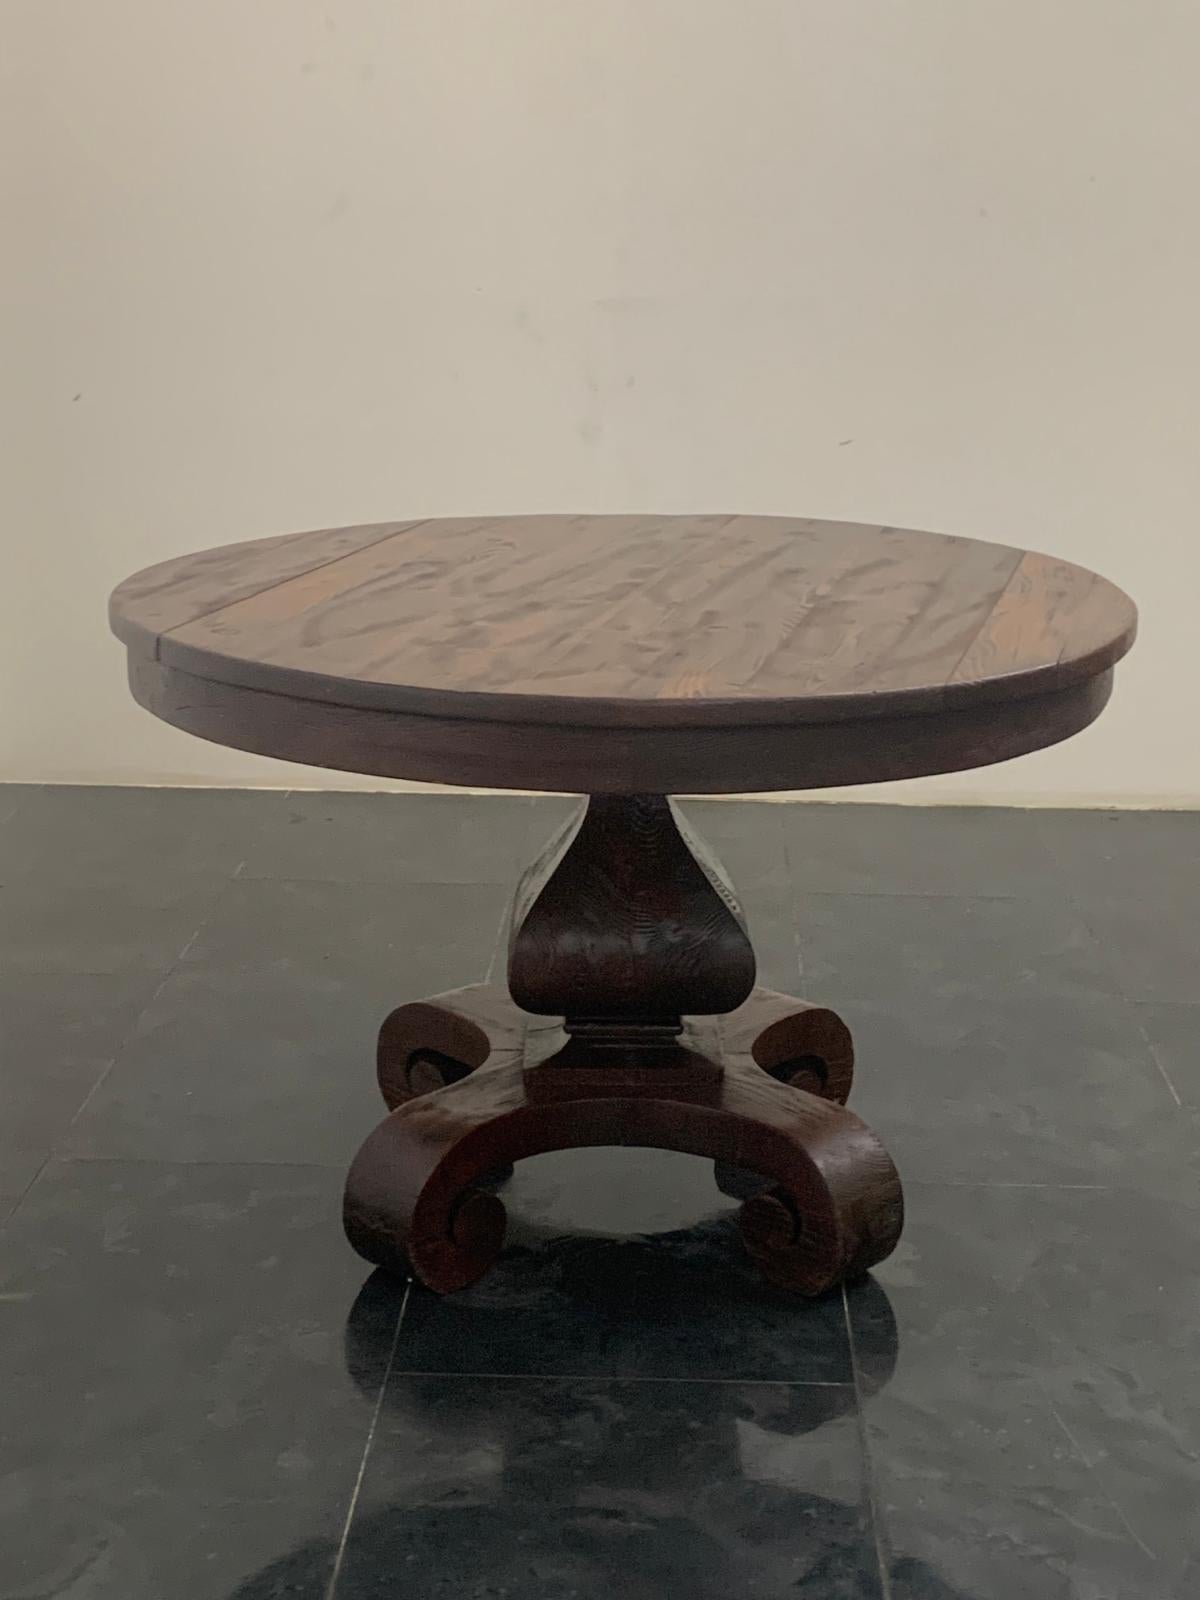 Brutalist oak table with spectacular workmanship that preserves the grain in relief, 1940s-50s. Central bowl-shaped base resting on a flattened and curved tripod. Round top of generous thickness. Overall, this table expresses elegance in its